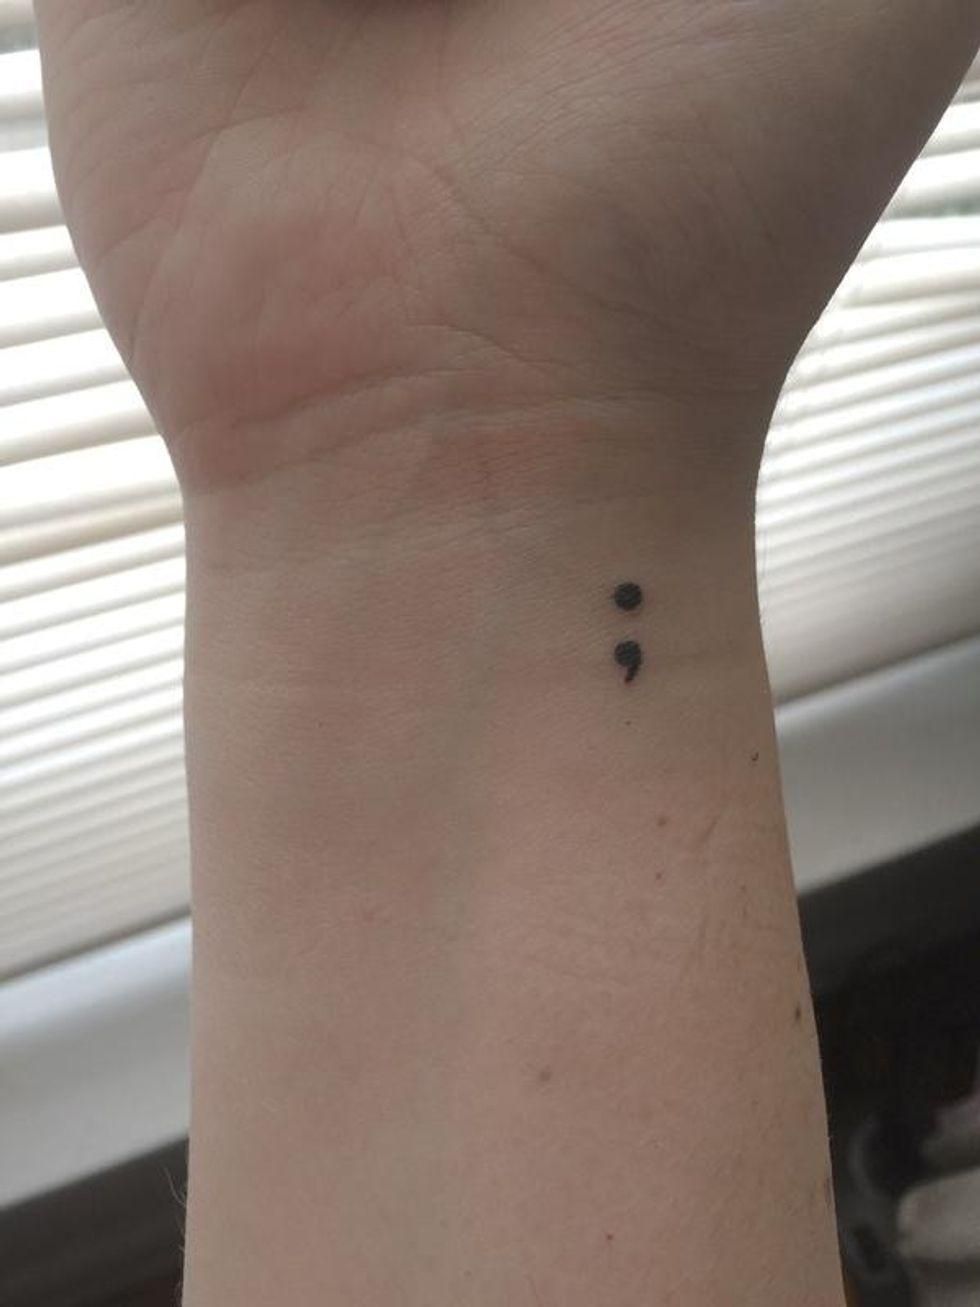 The Semicolon Tattoo  A Creative and Inspirational Sign of Support